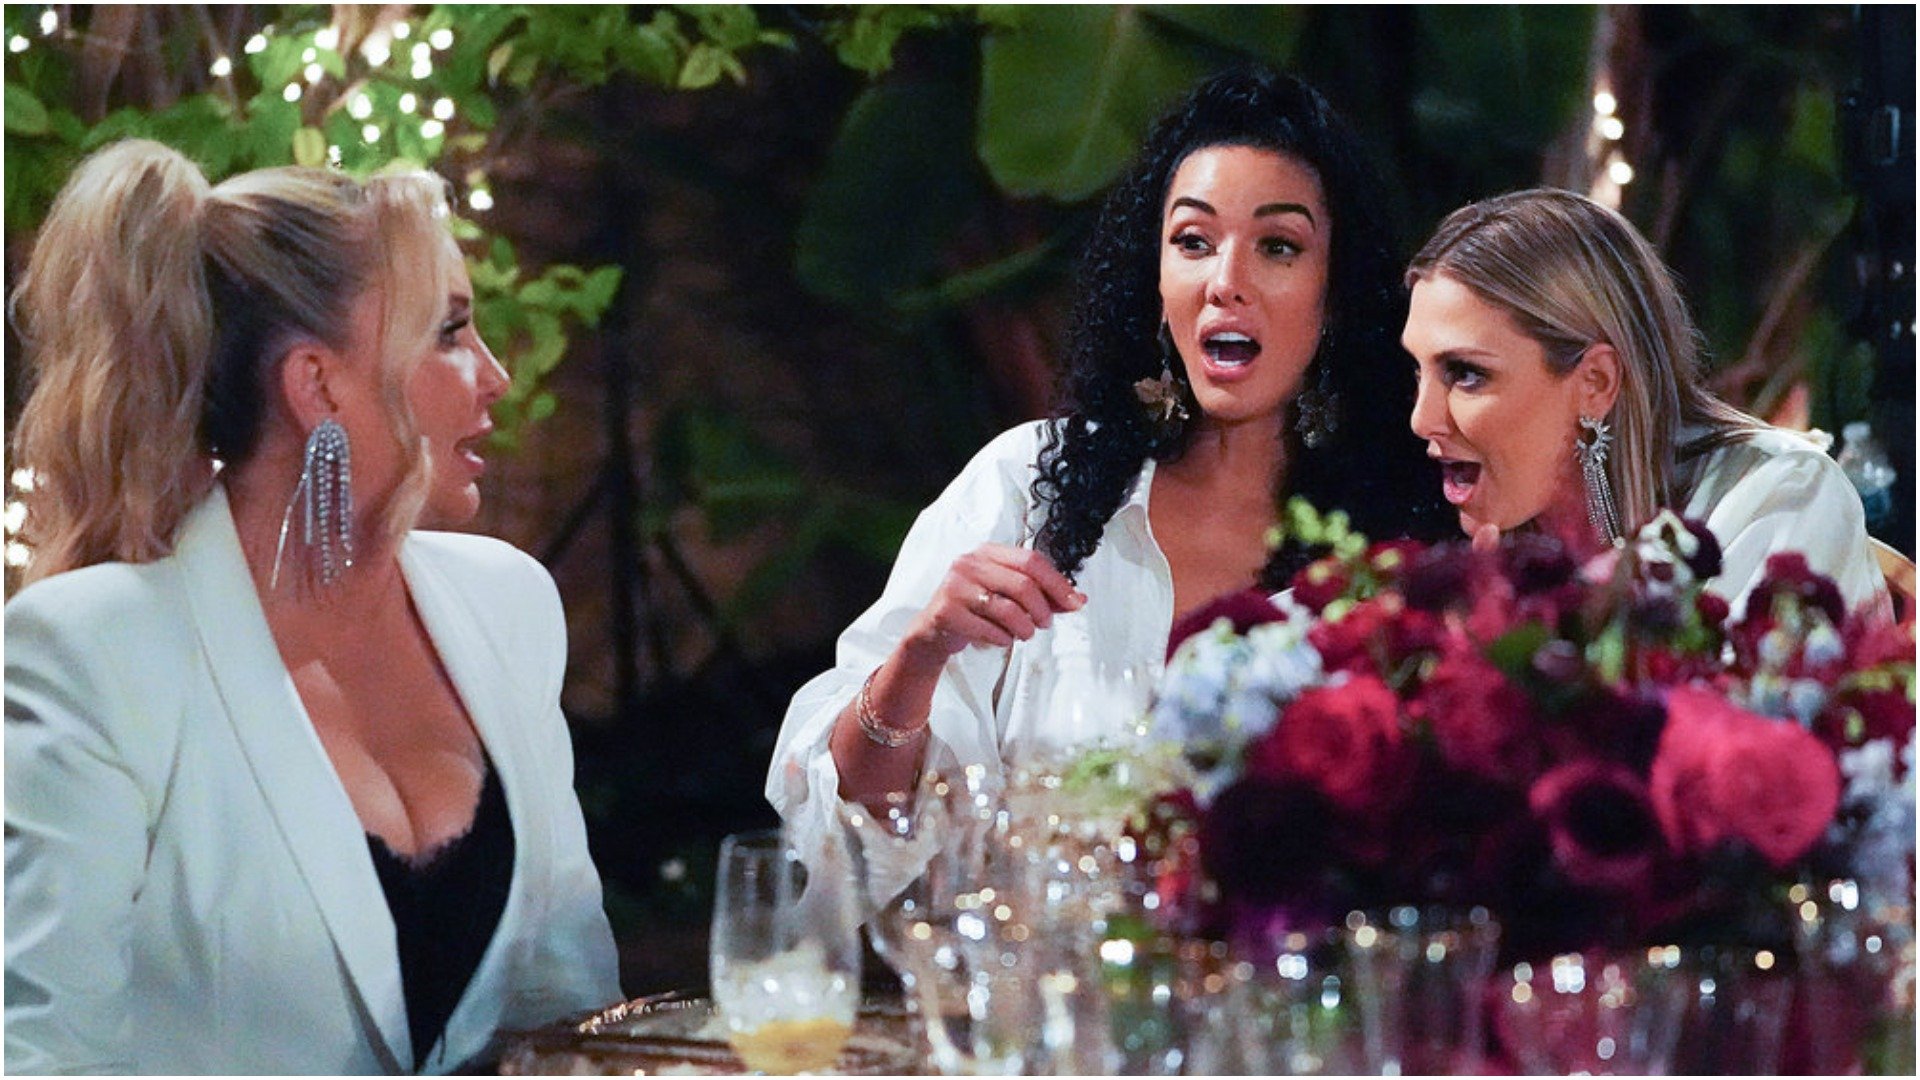 Shannon Storms Beador, Noella Bergener, Gina Kirschenheiter agrue at a diner party on RHOC